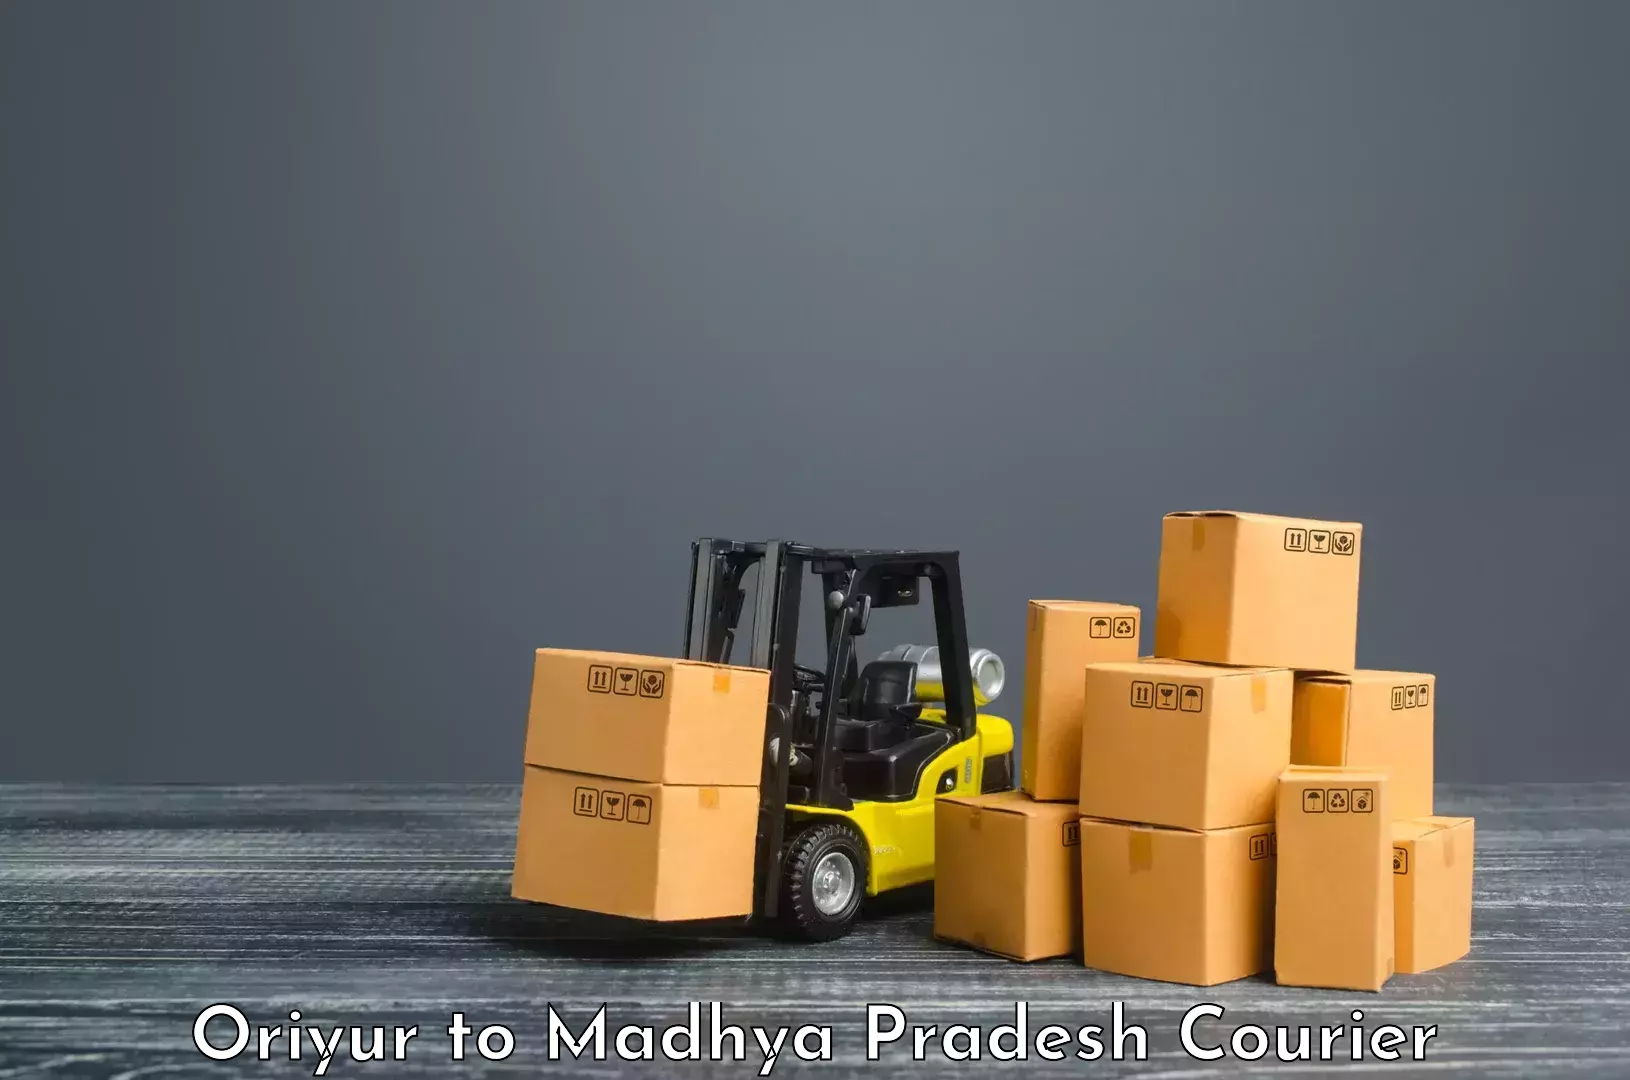 Express courier capabilities Oriyur to Petlawad